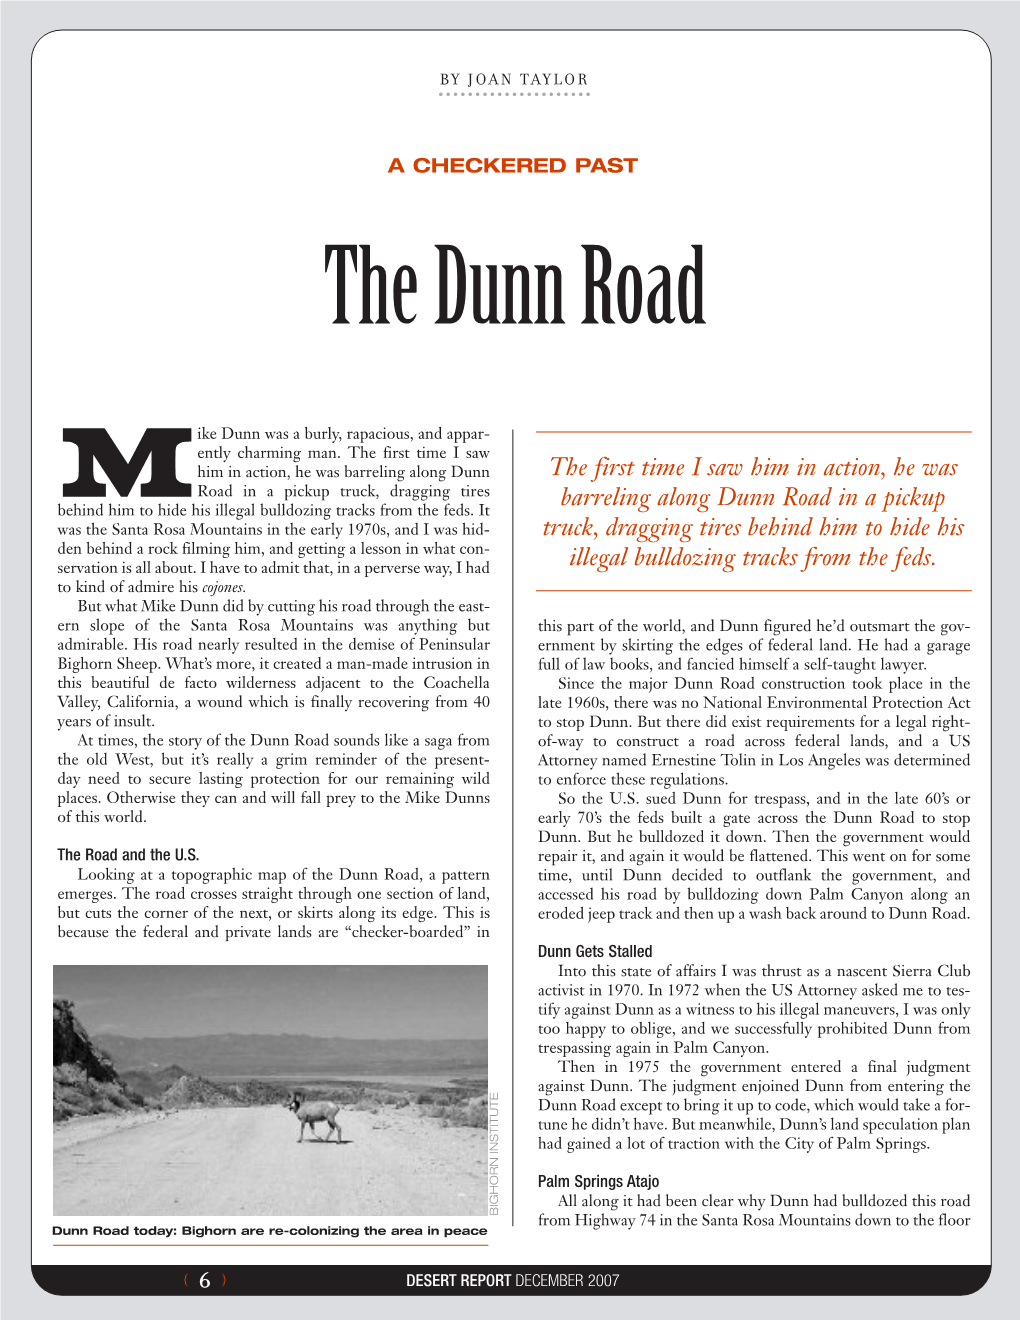 The Dunn Road